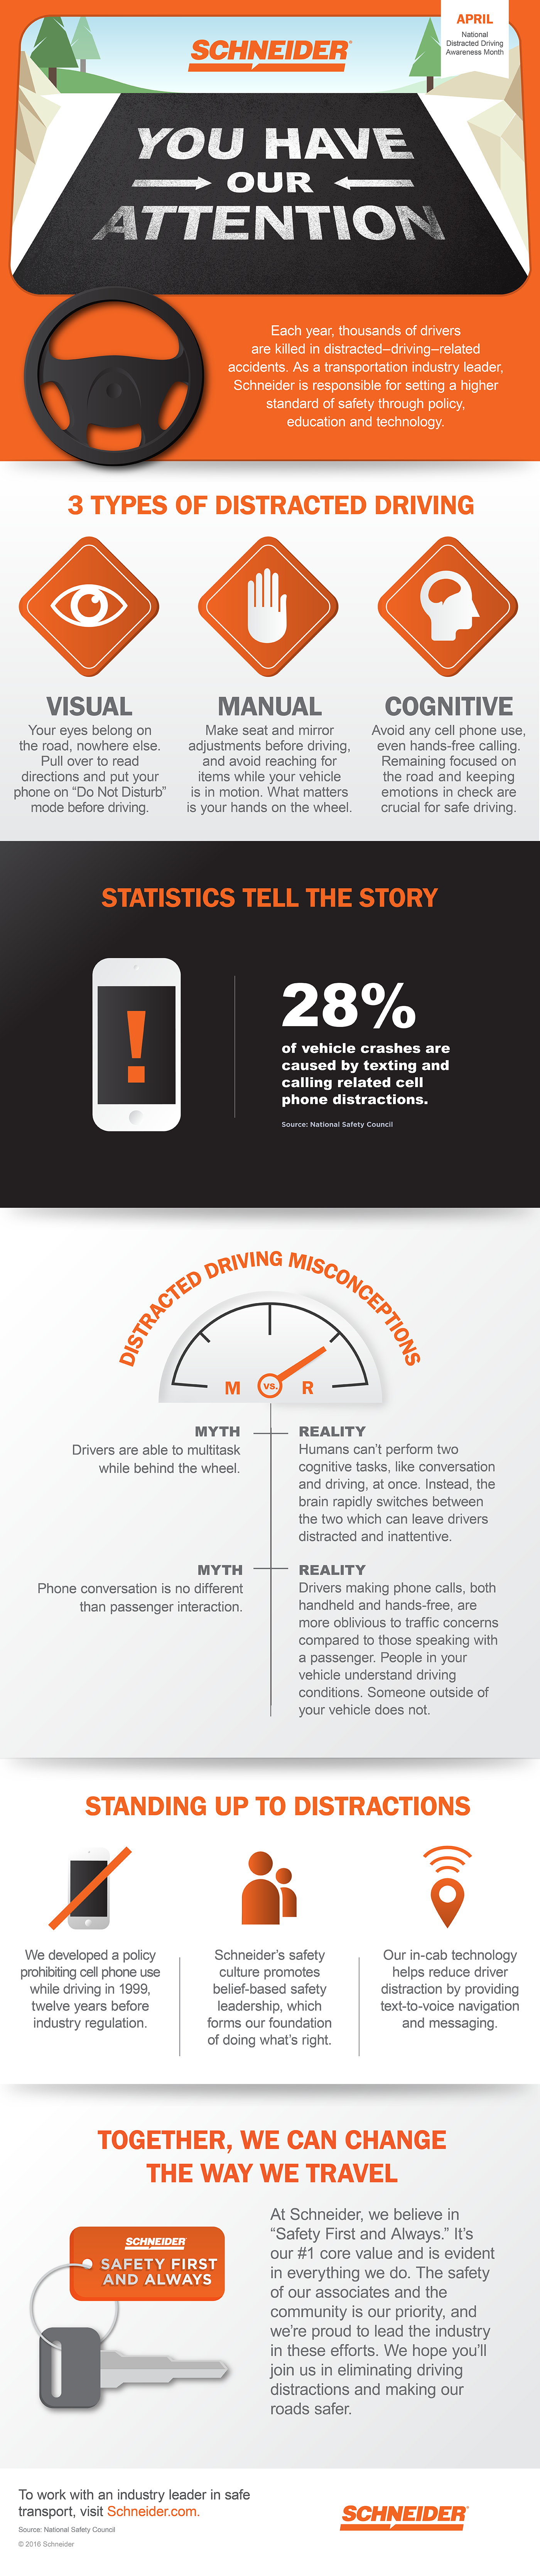 Distracted Driving infographic with examples of distracted driving, statistics, misconceptions and information on what Schneider is doing to stop distracted driving